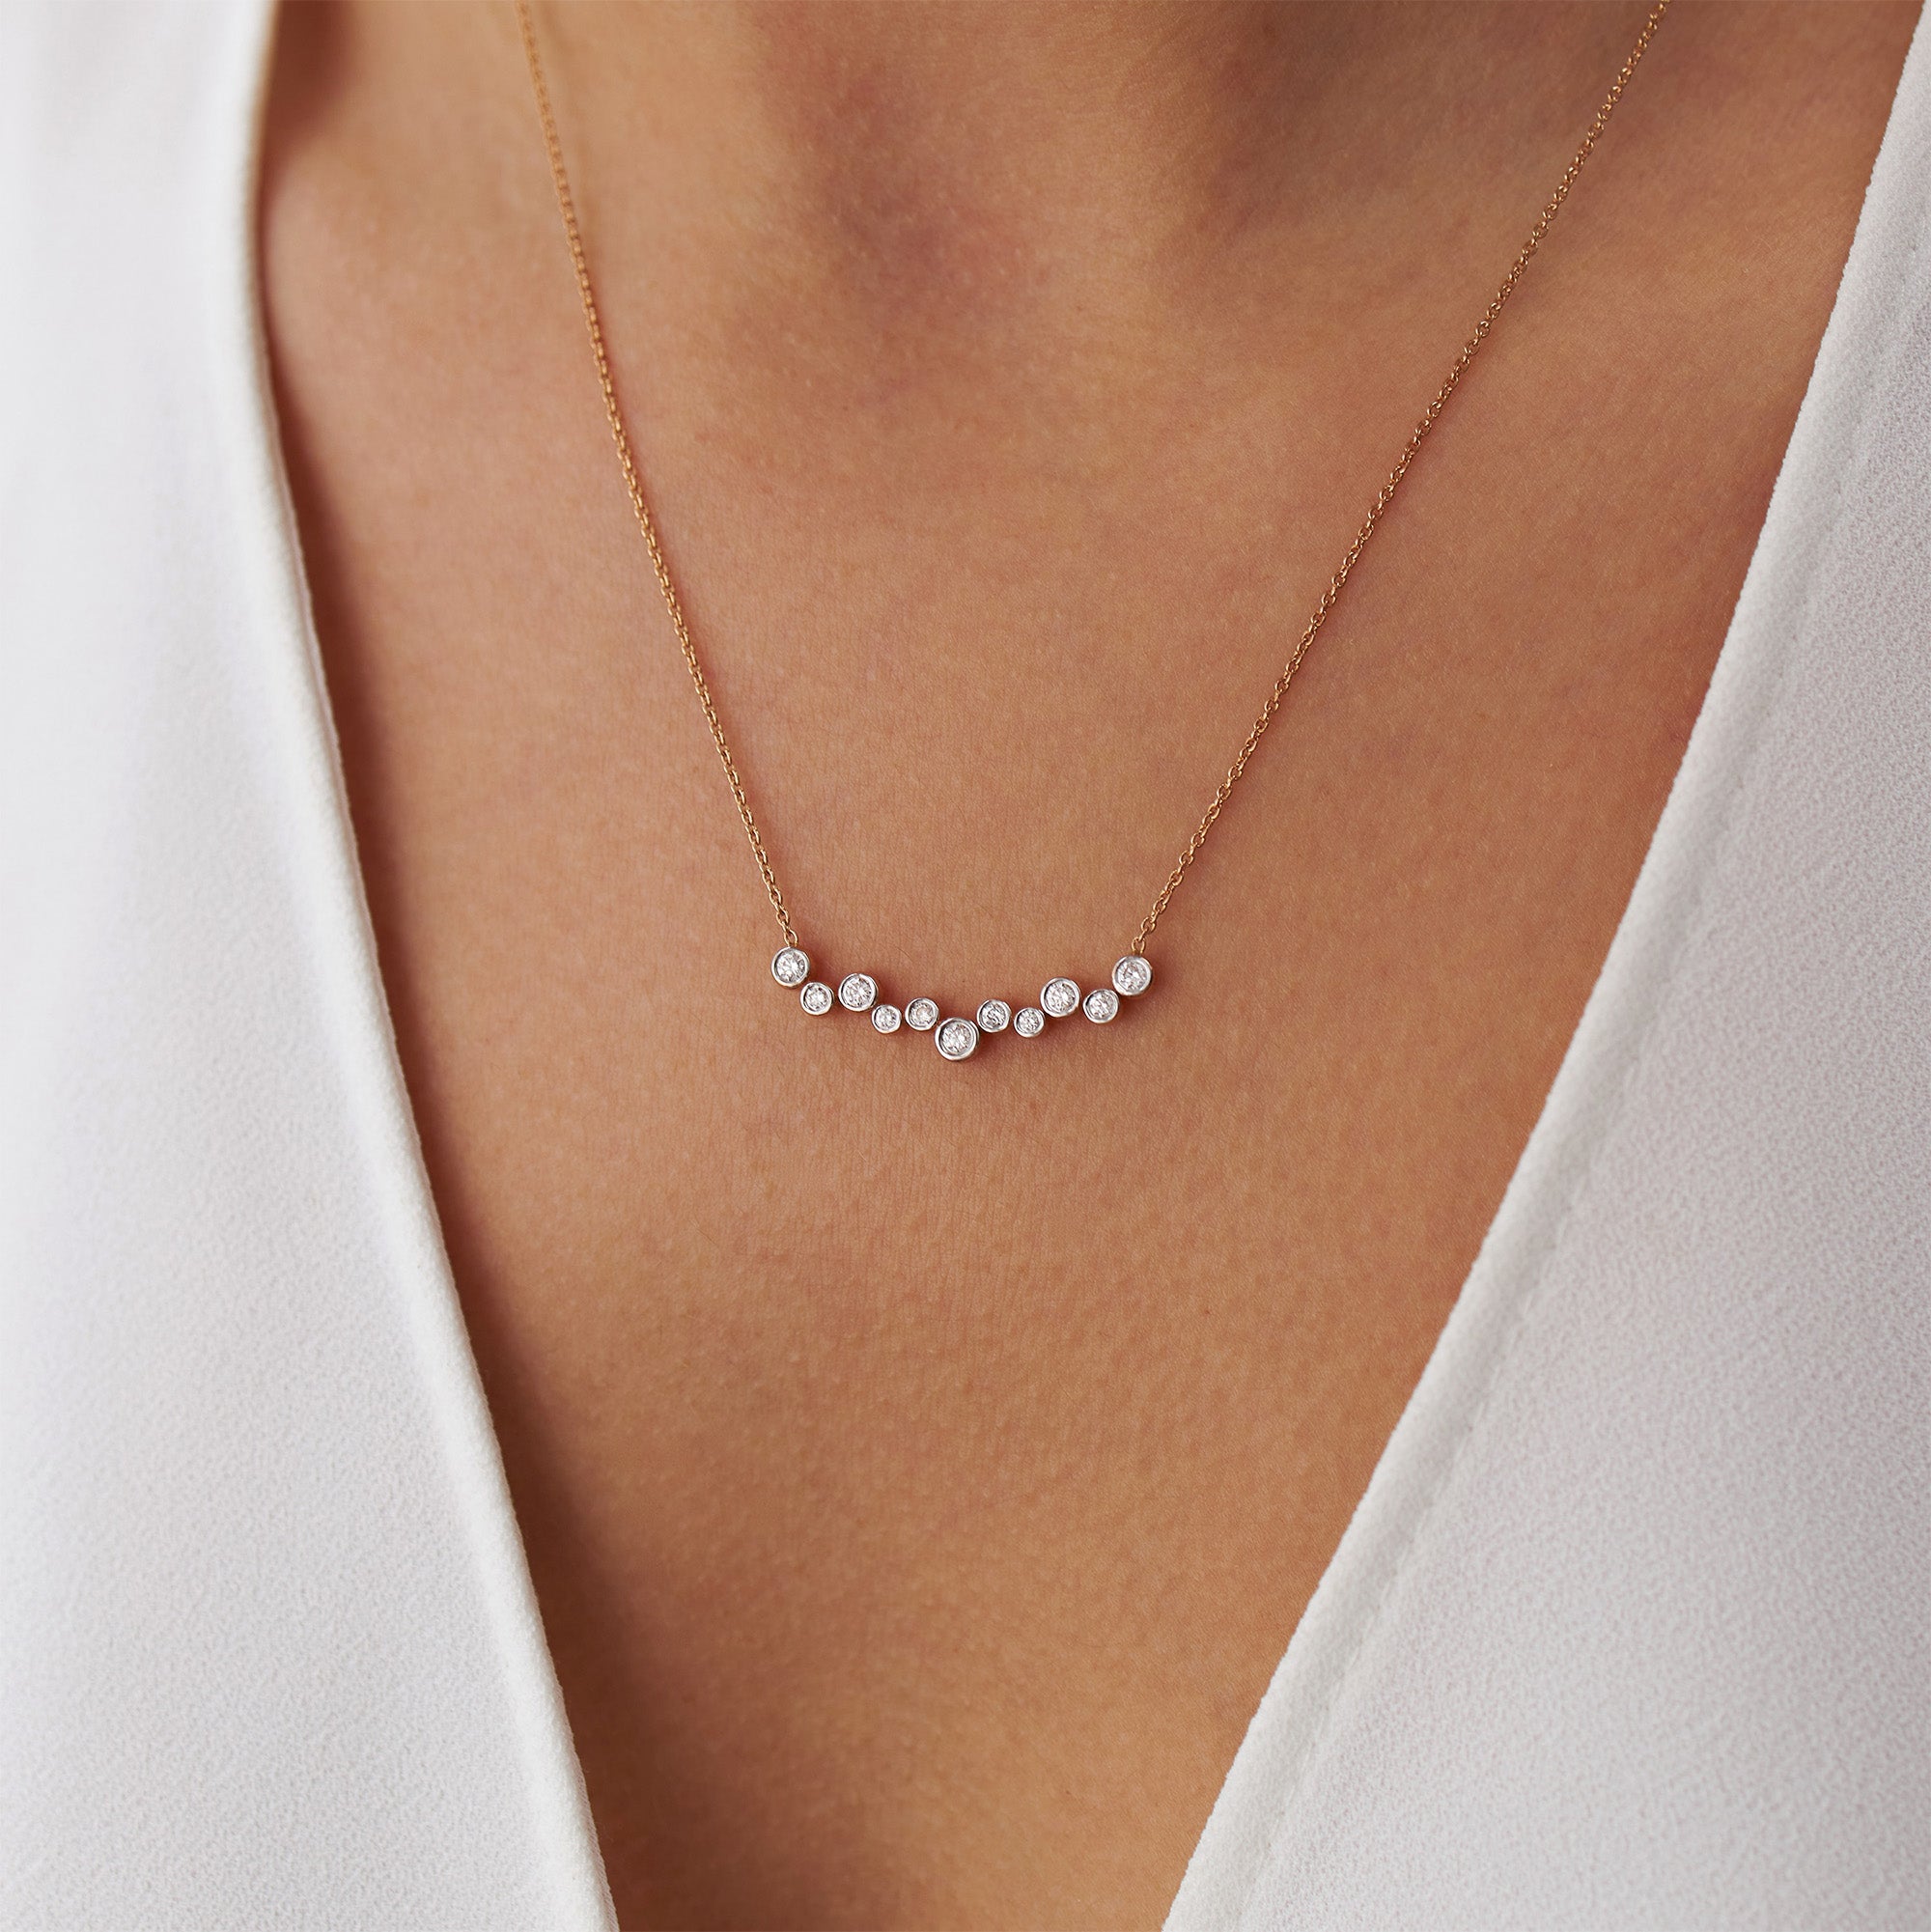 Bezel Set Diamond Bar Necklace Available in 14K and 18K Gold